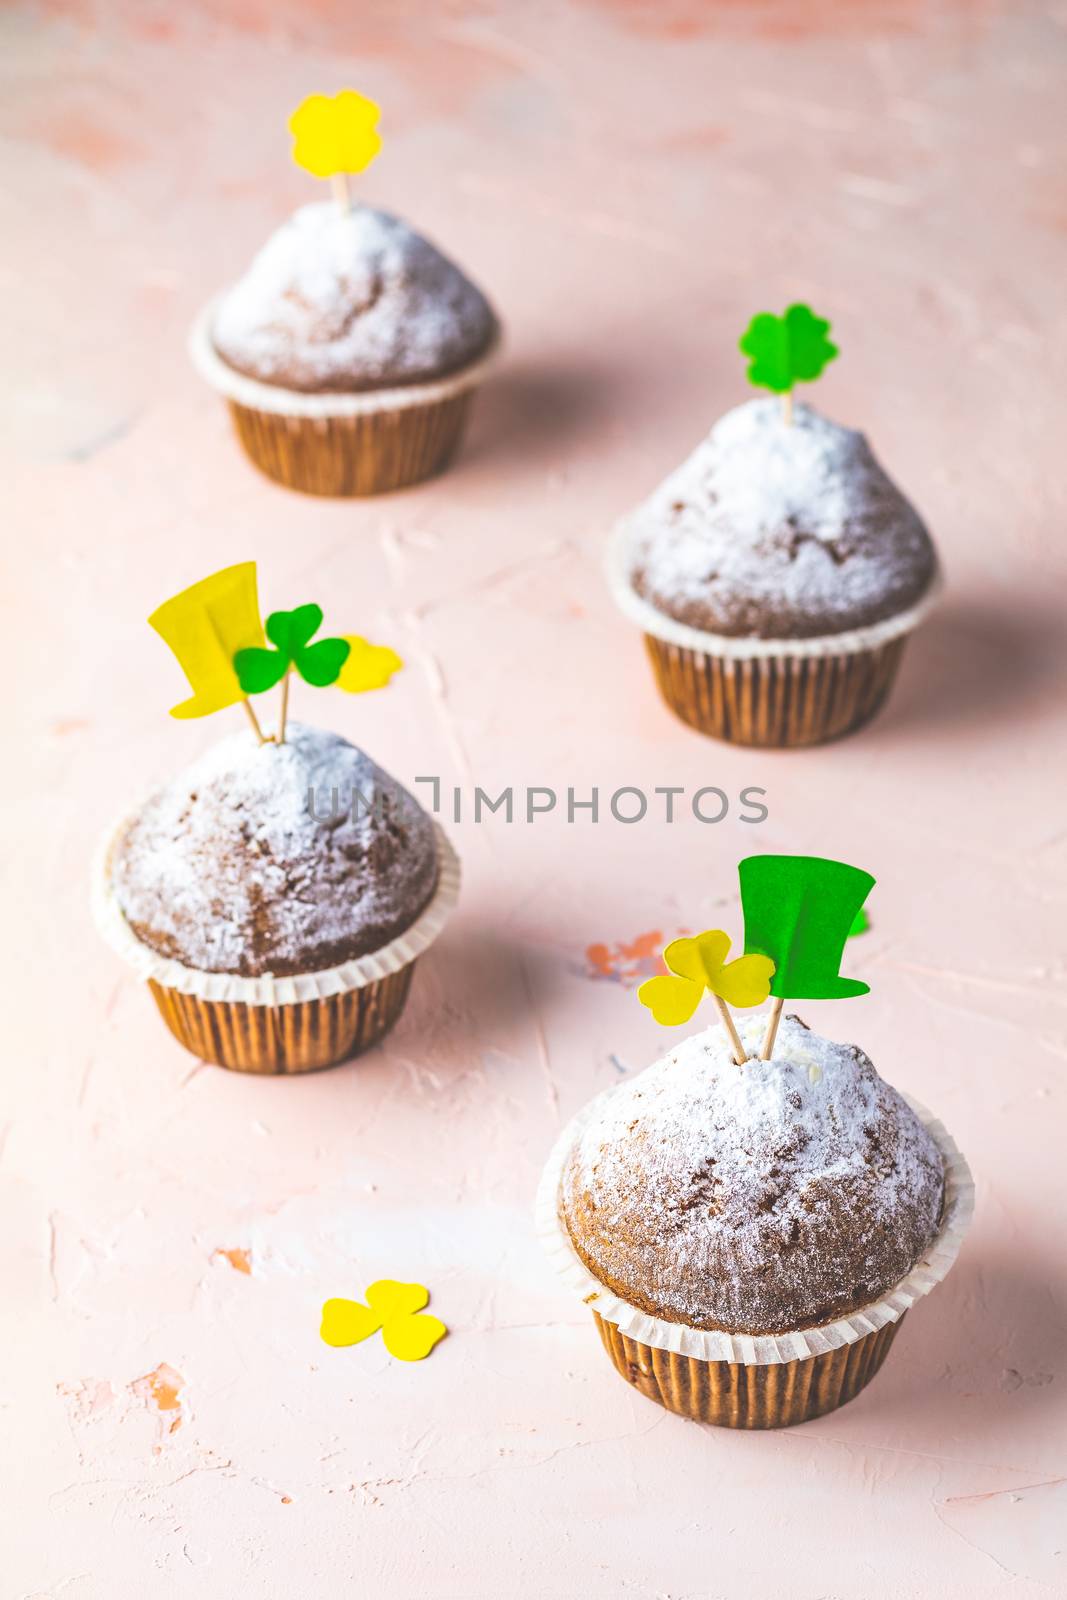 Tasty delicious homemade muffin on light pink living coral stone concrete surface with knitting hearts, copy space. Sweet food for Saint Patrick day.